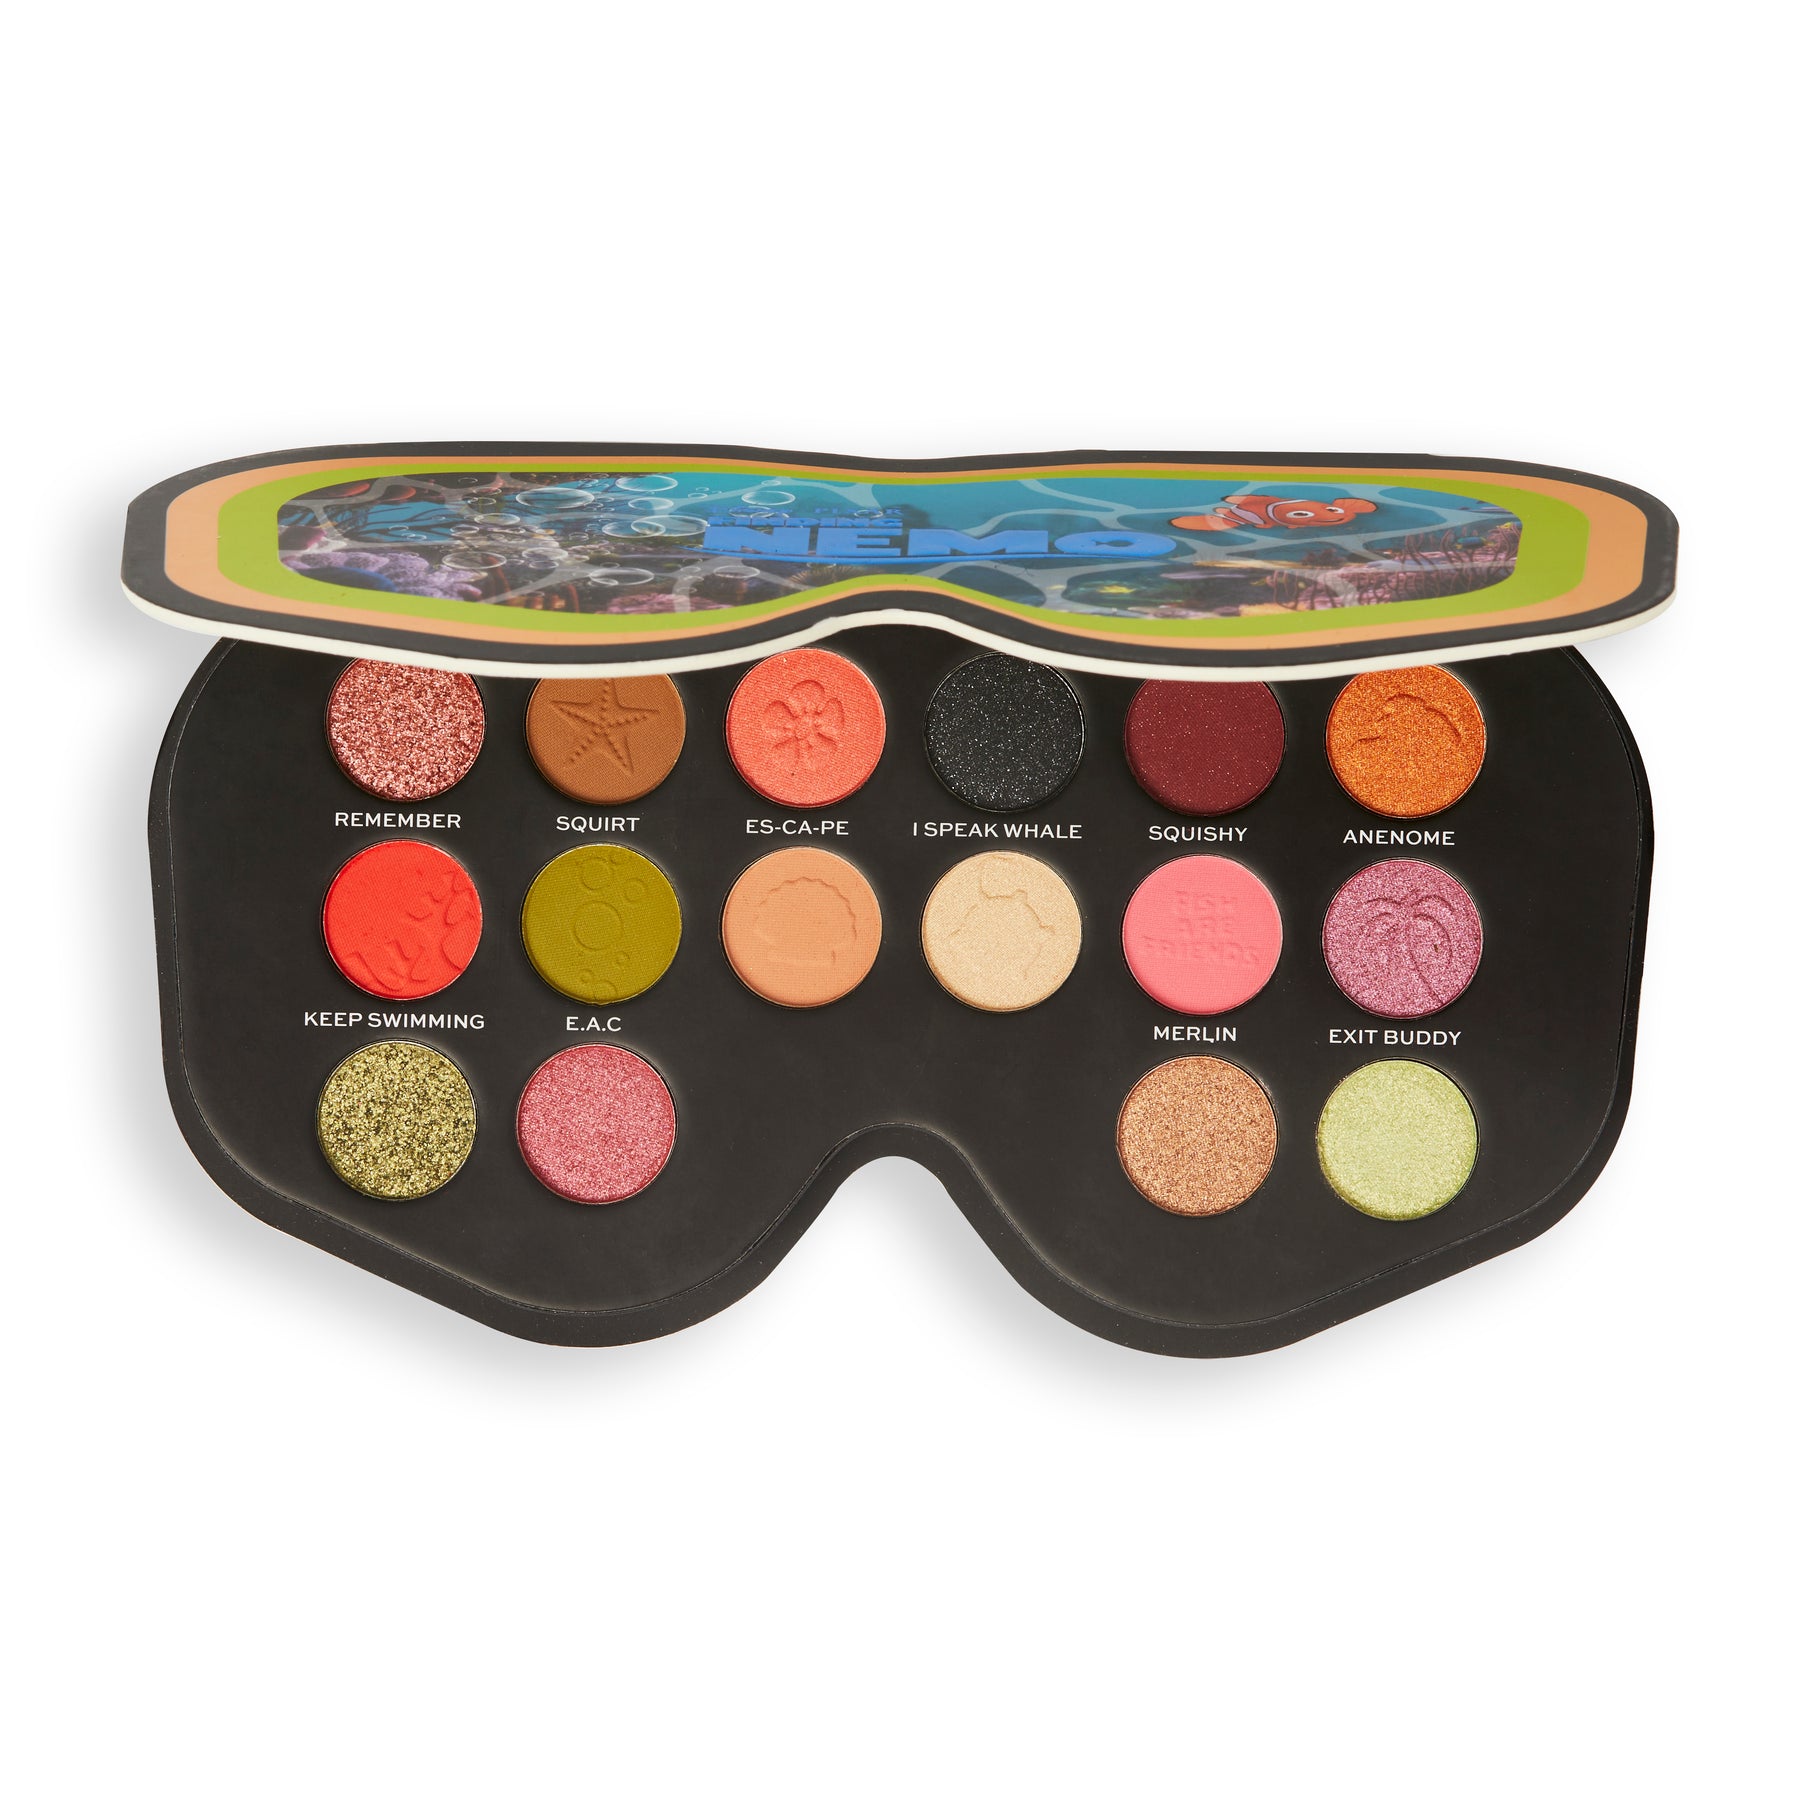 DISNEY & PIXAR’S FINDING NEMO AND REVOLUTION P. SHERMAN SHADOW PALETTE - OUTLET